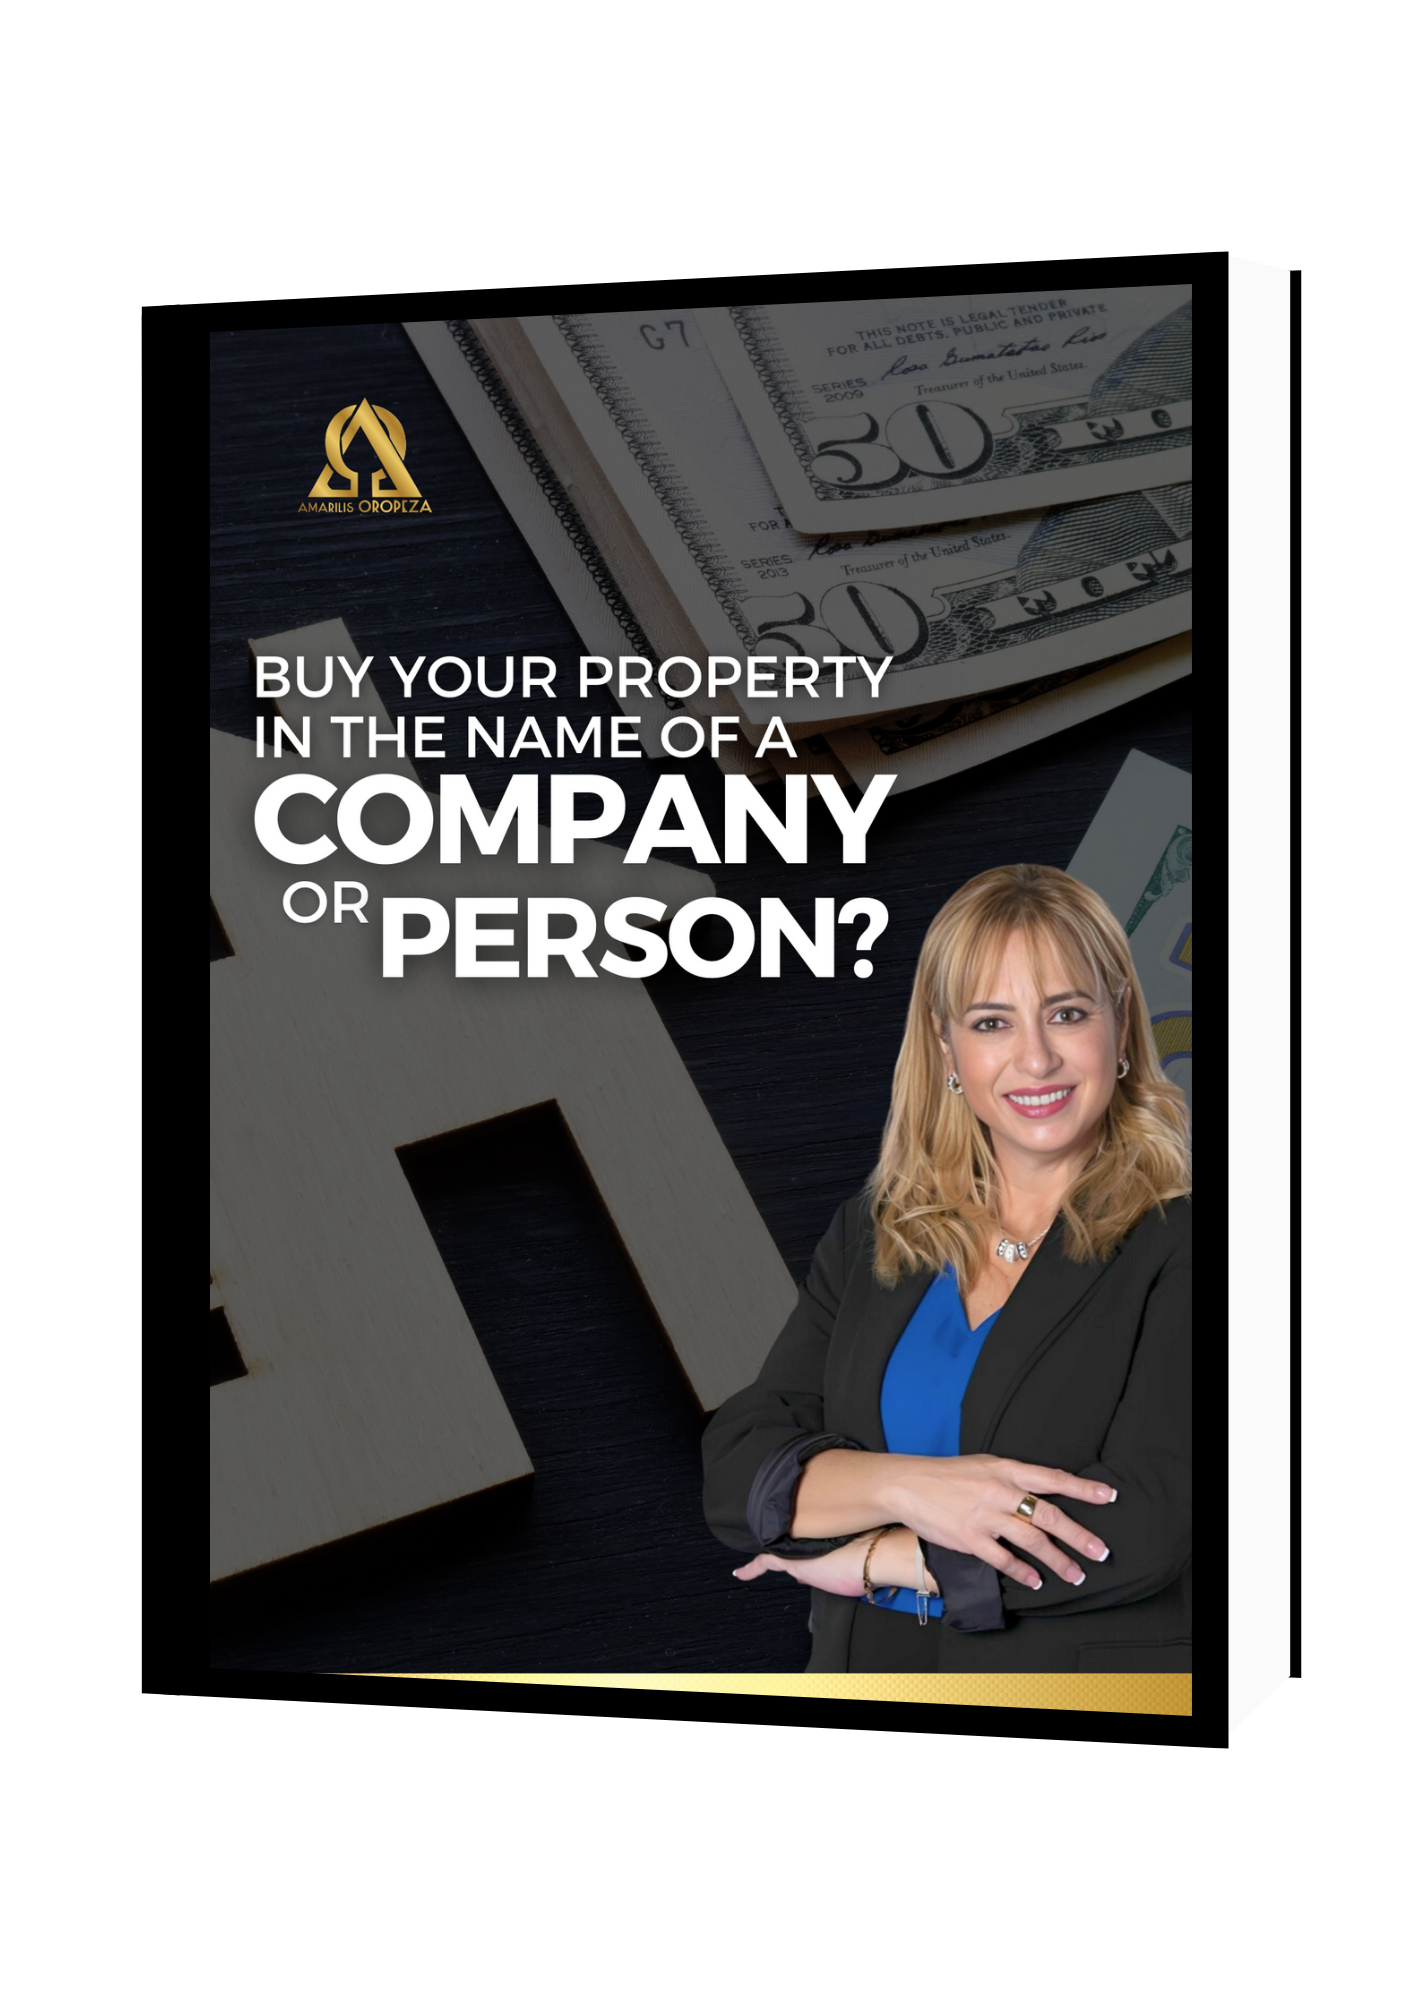 Buy your property in the name of a company or person?